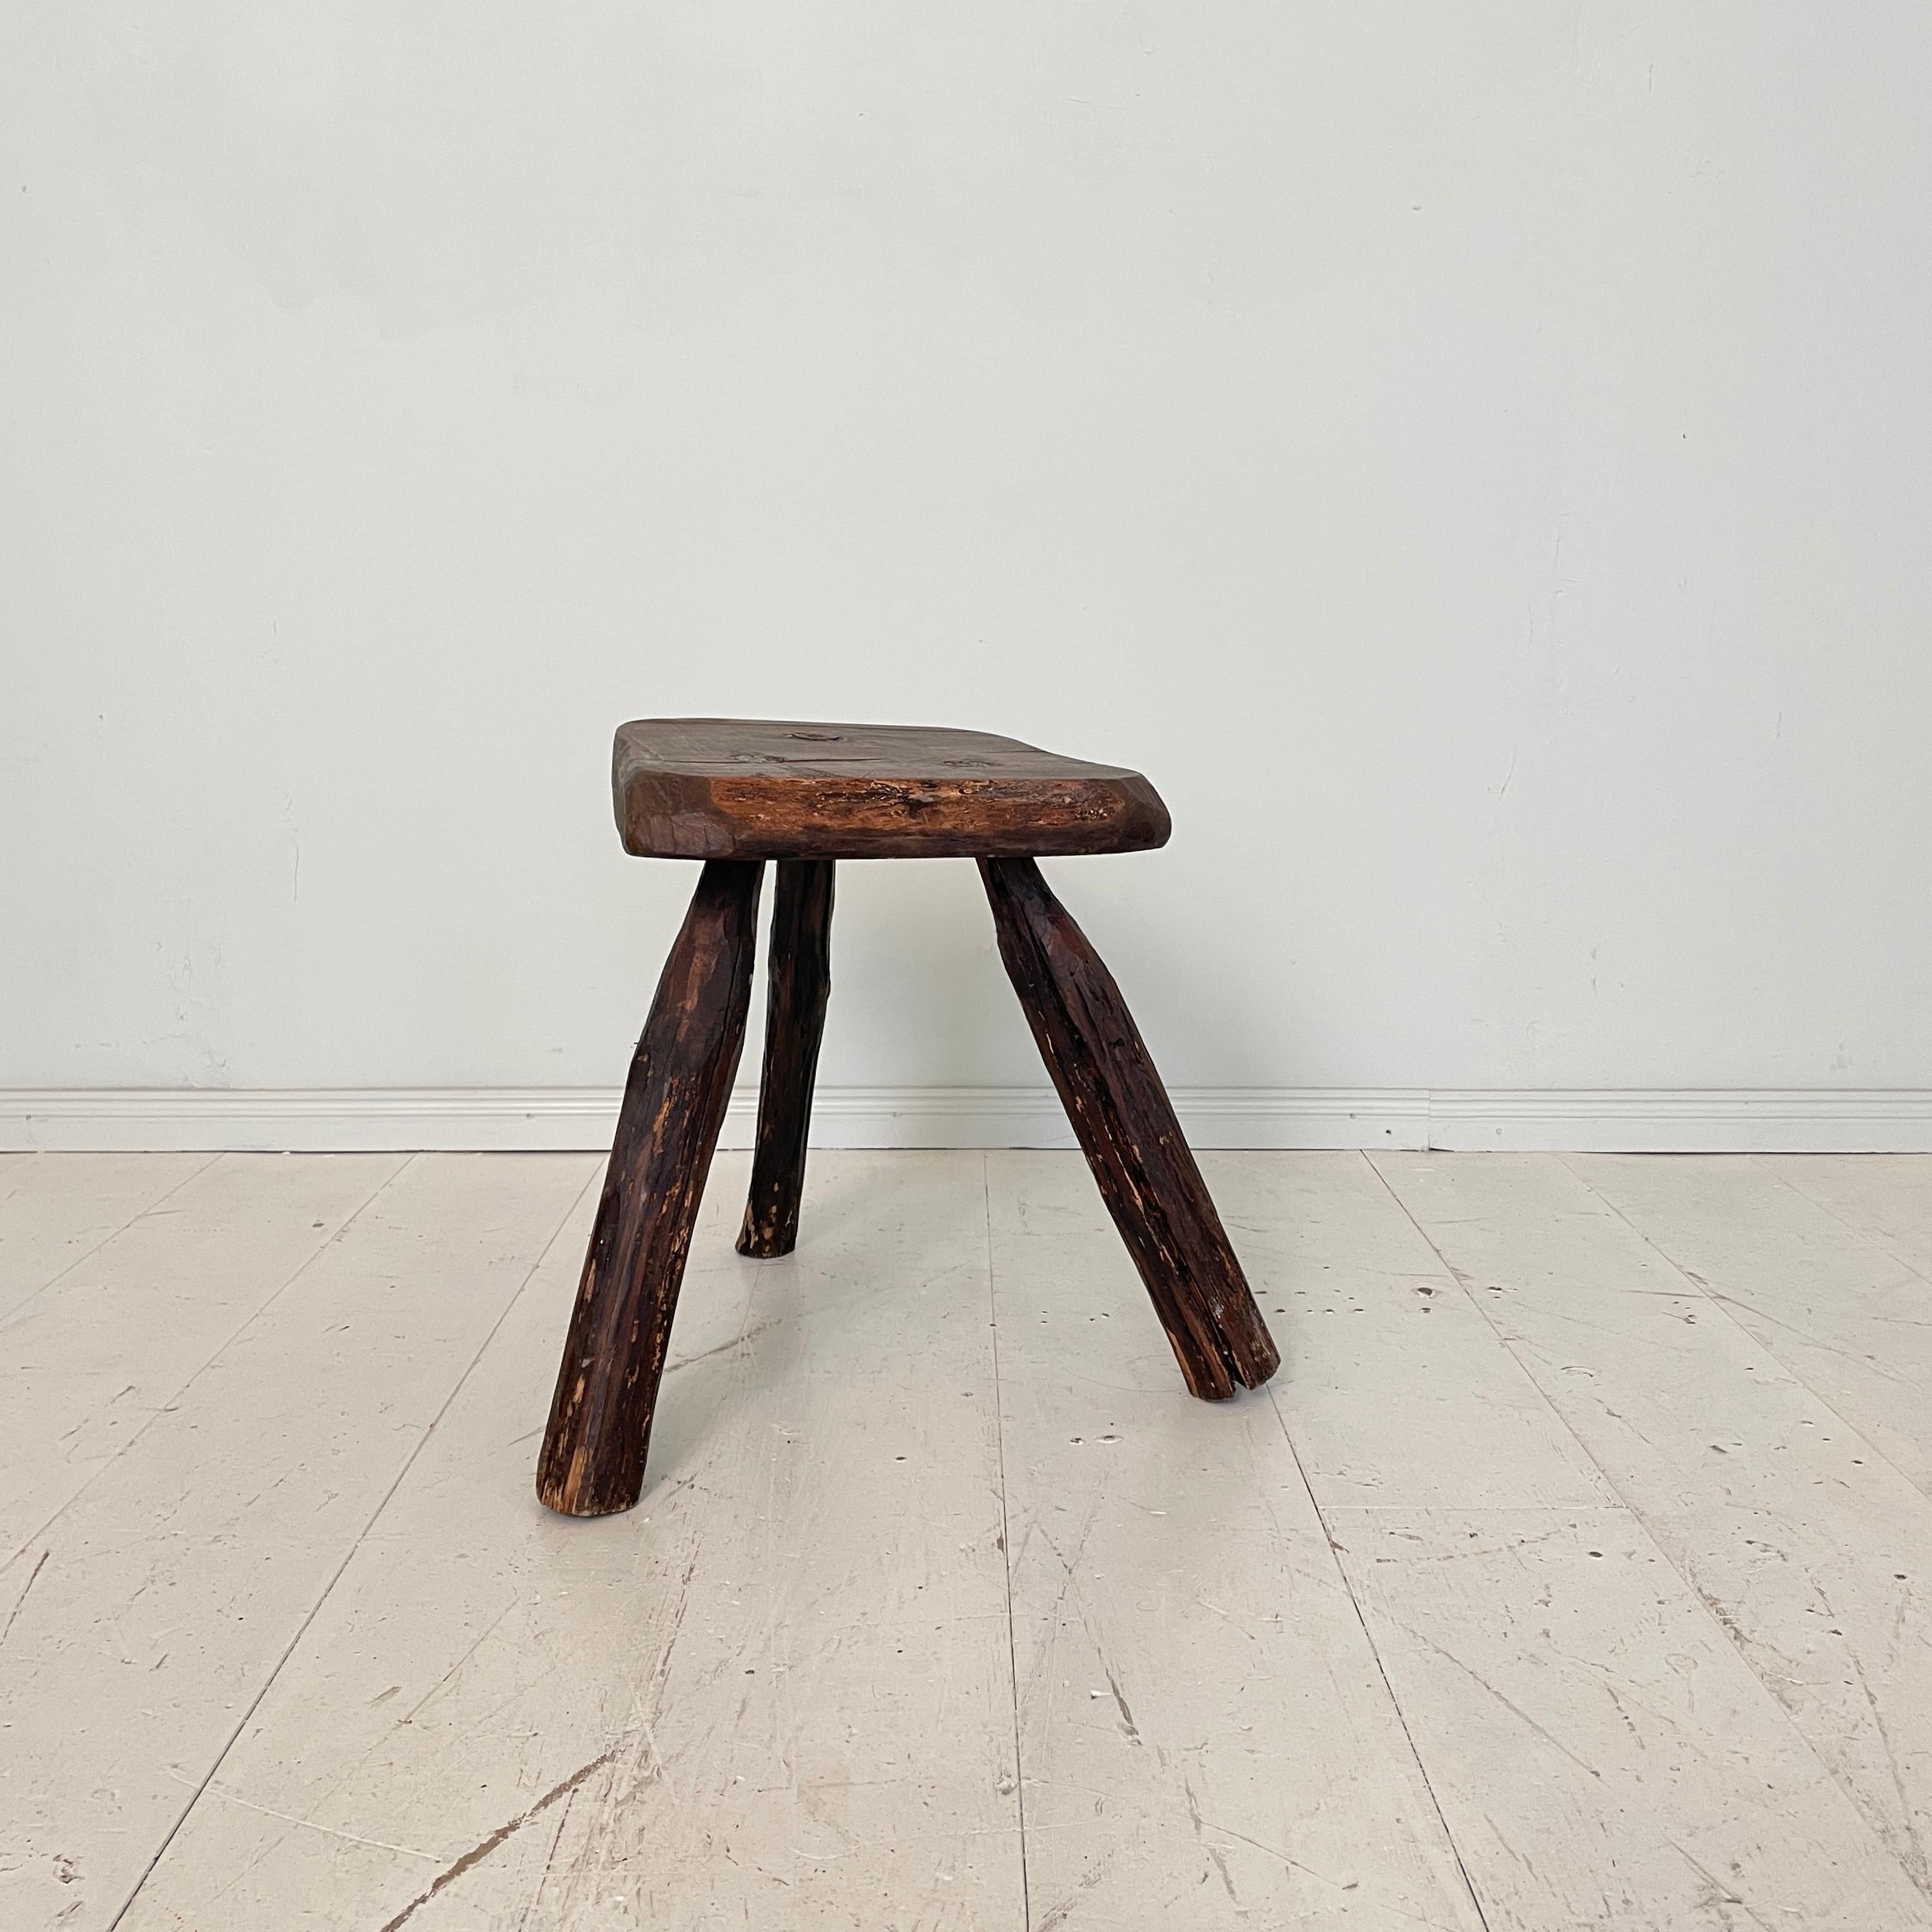 This primitive milking splayed leg wood stool was made circa 1910. The seat is out of a solid piece of ash and the legs are made out of pine. 
It has this fabulous Wabi Sabi look and beautiful patina. It is in its original condition. 
A unique